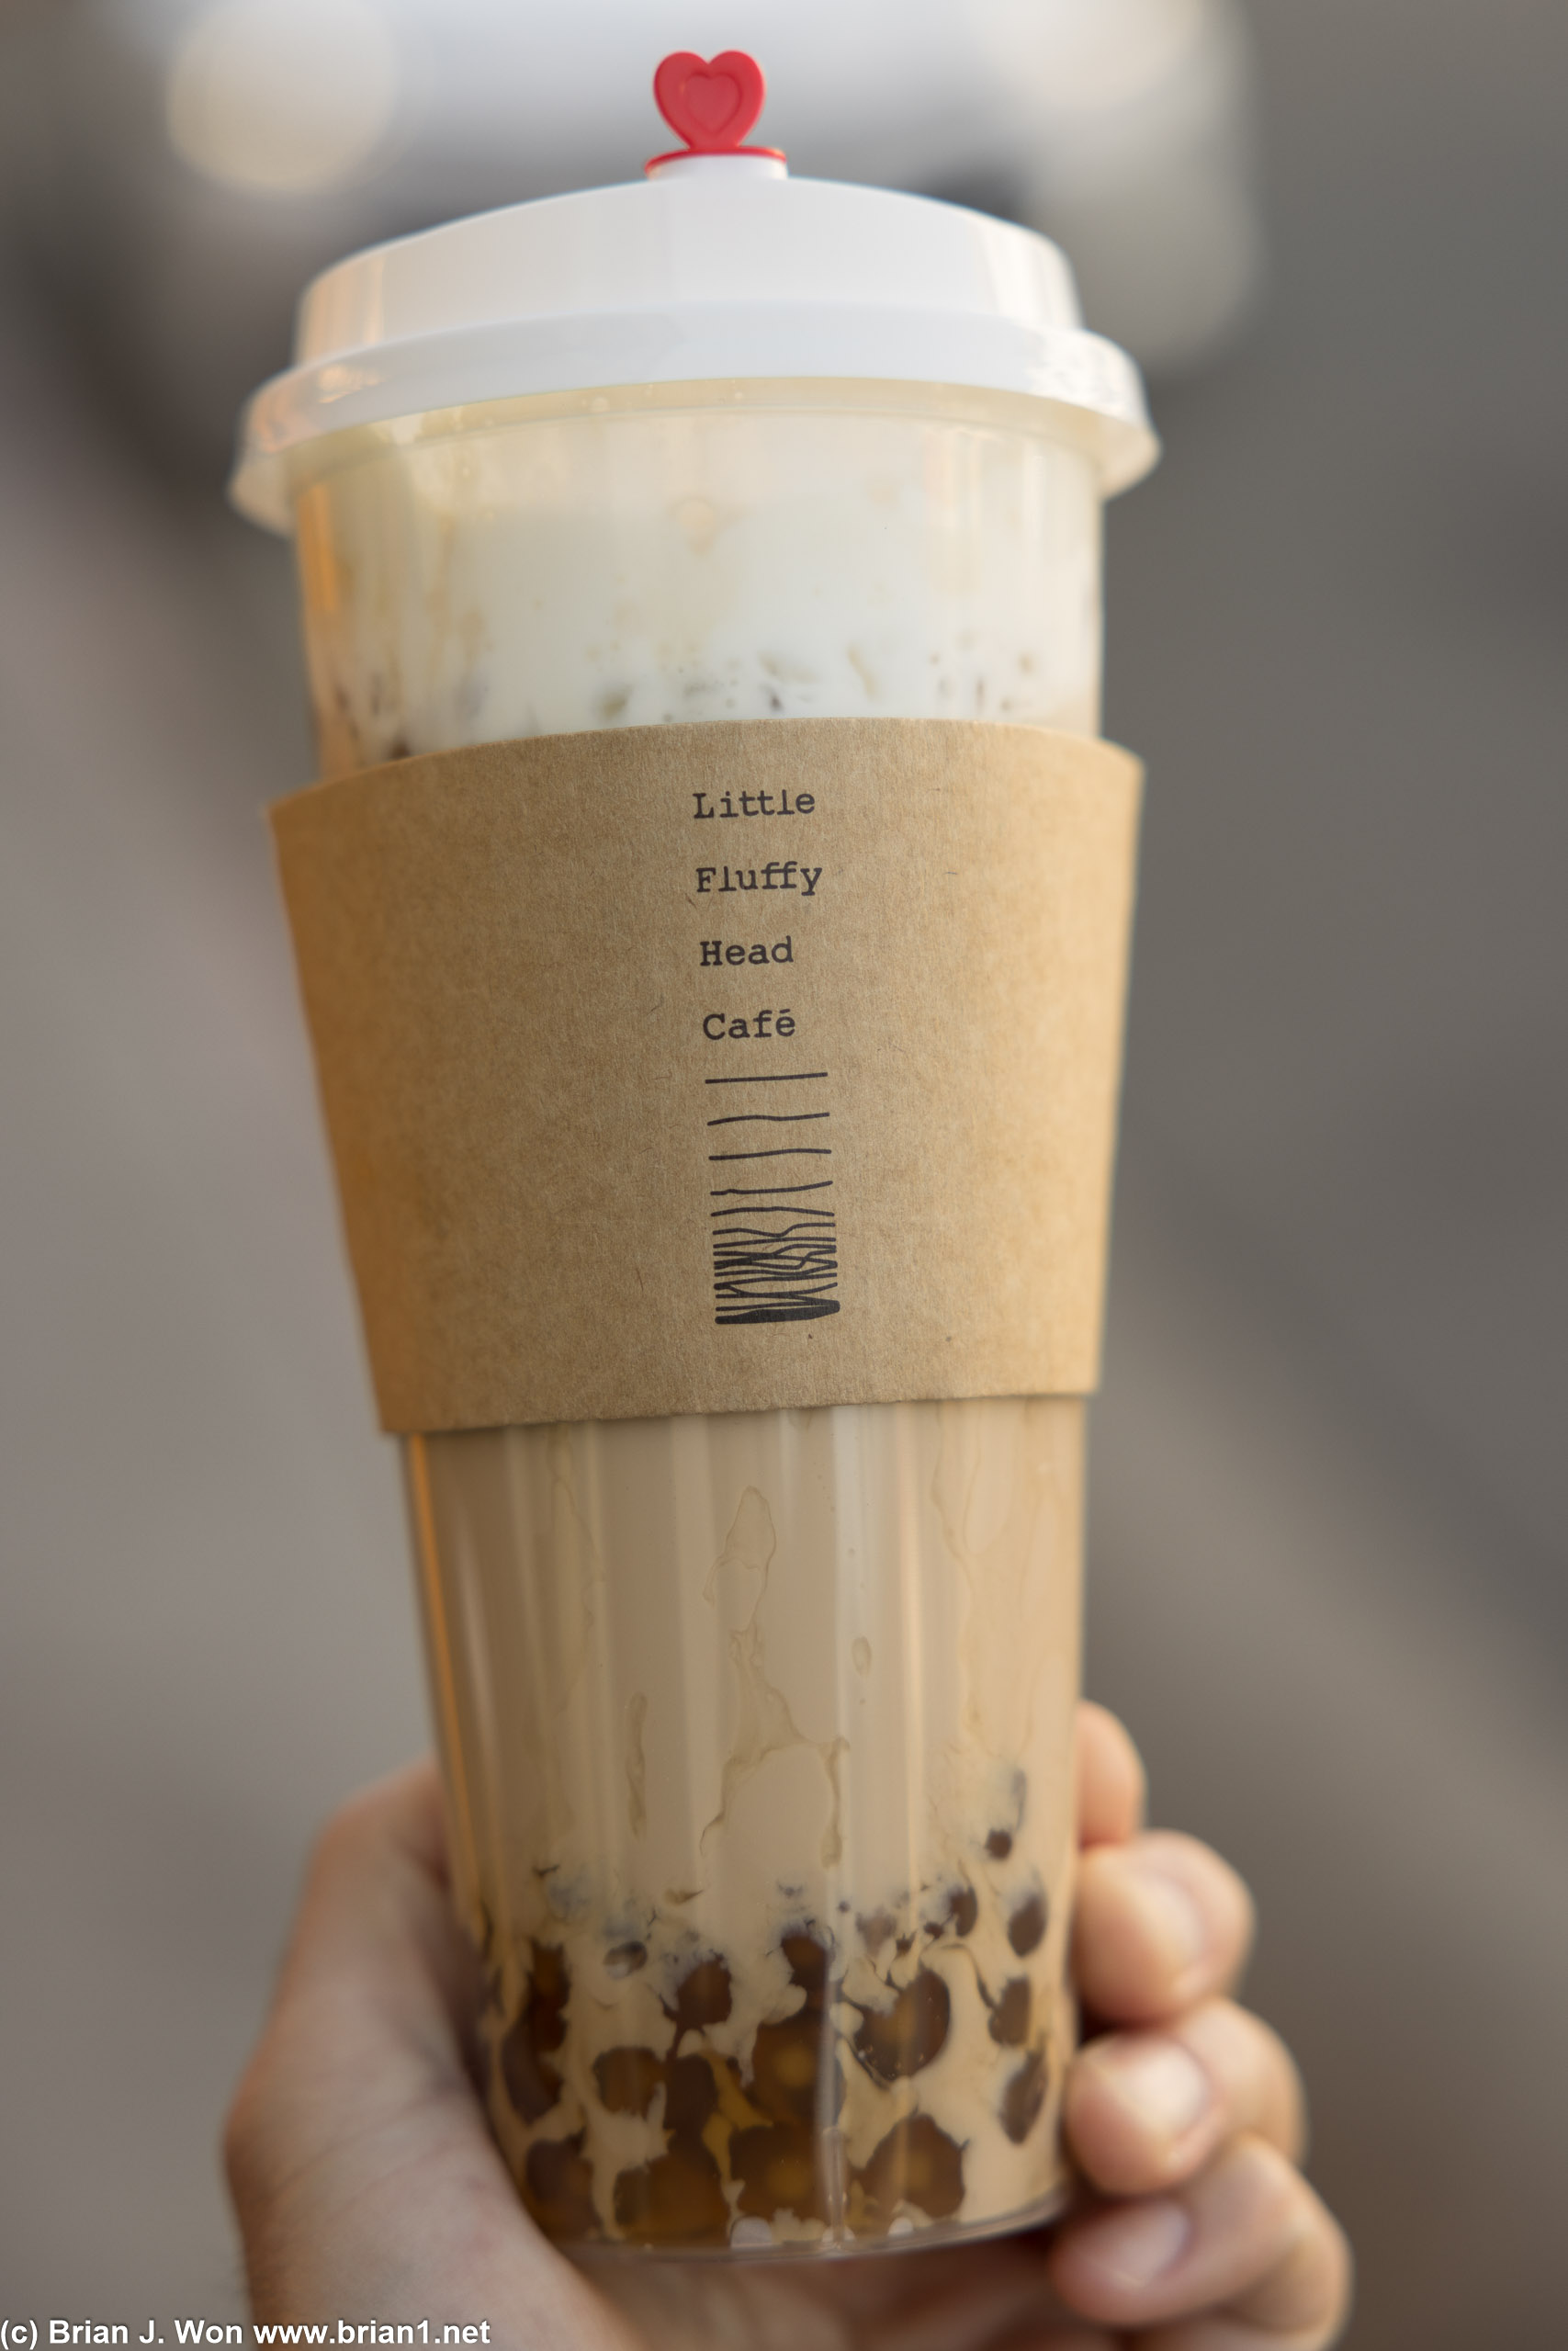 Oolong milk tea with white pearls. Just okay, especially considering the premium price.